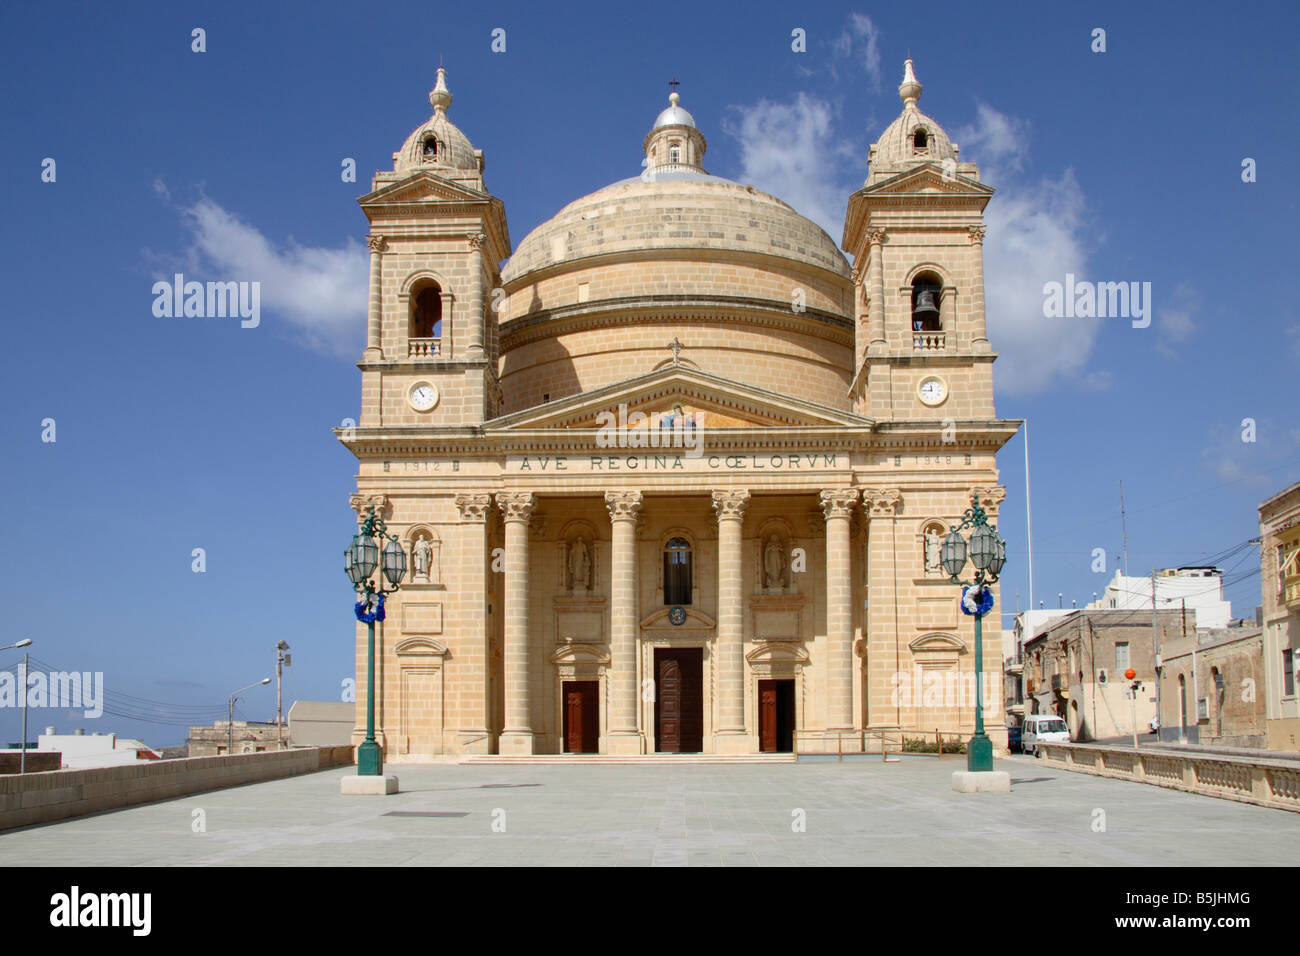 The 'Church of Assumption' in Mgarr, Malta. Stock Photo